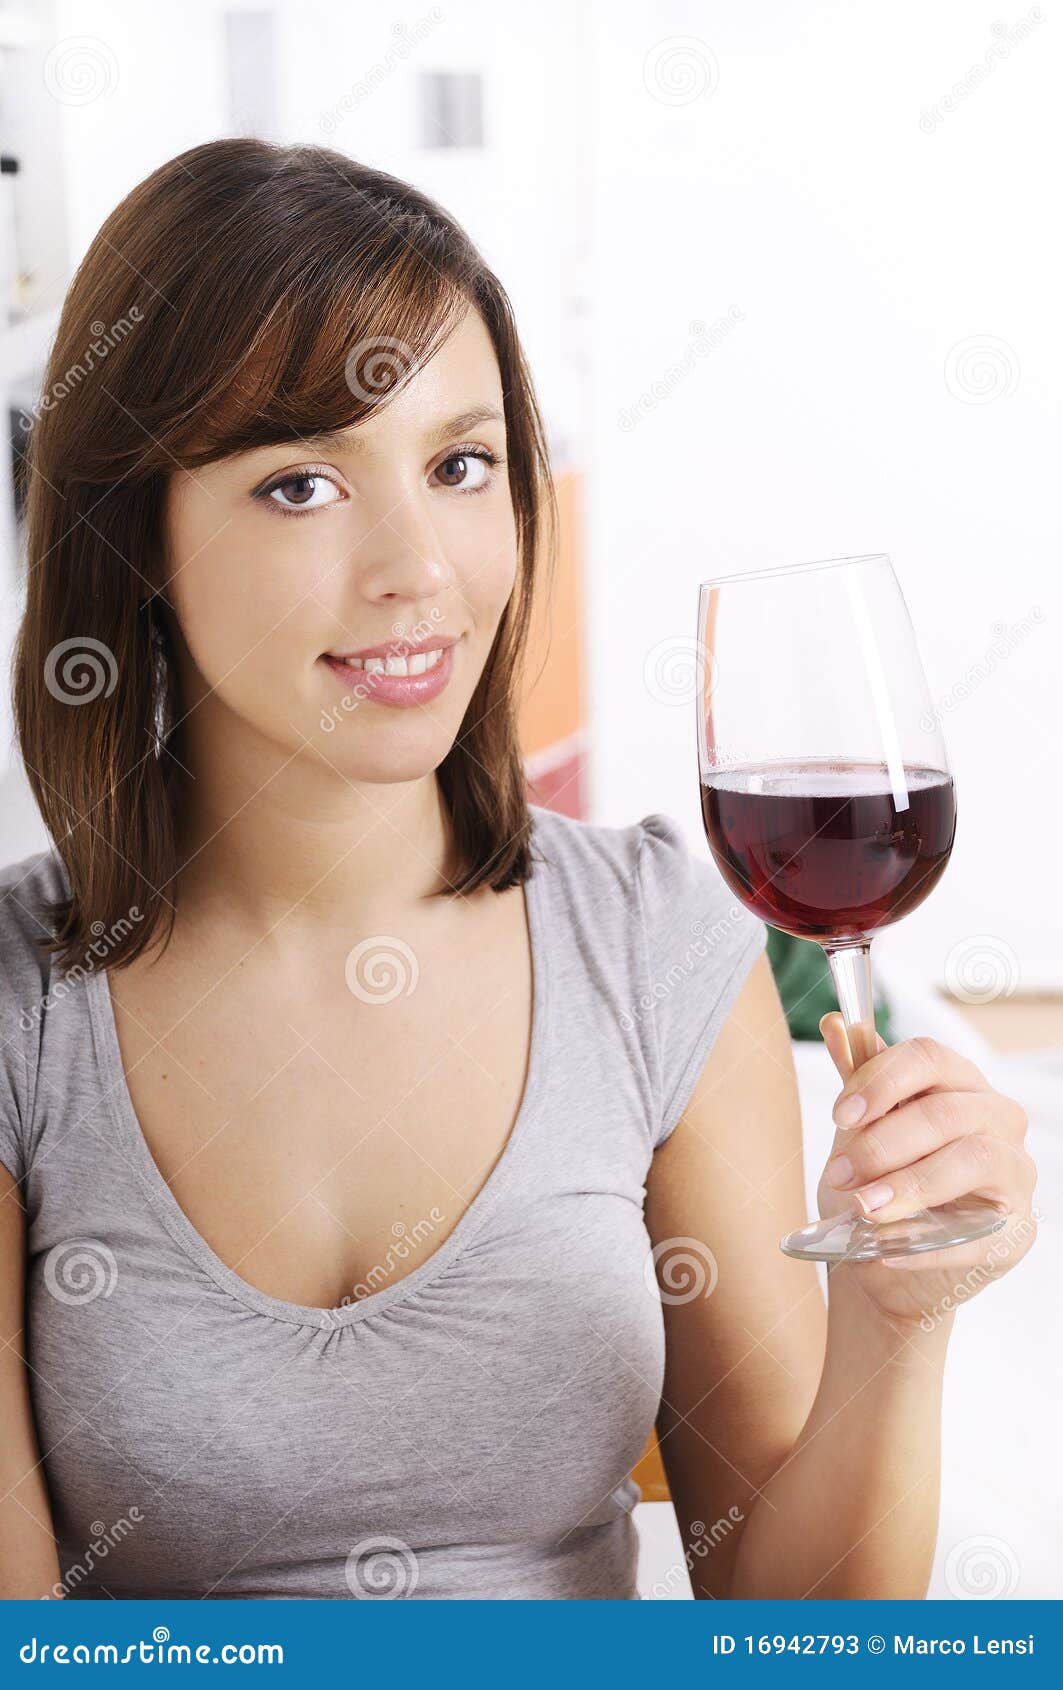 Young Woman Drinking Red Wine Stock Image - Image of indoor, food: 16942793